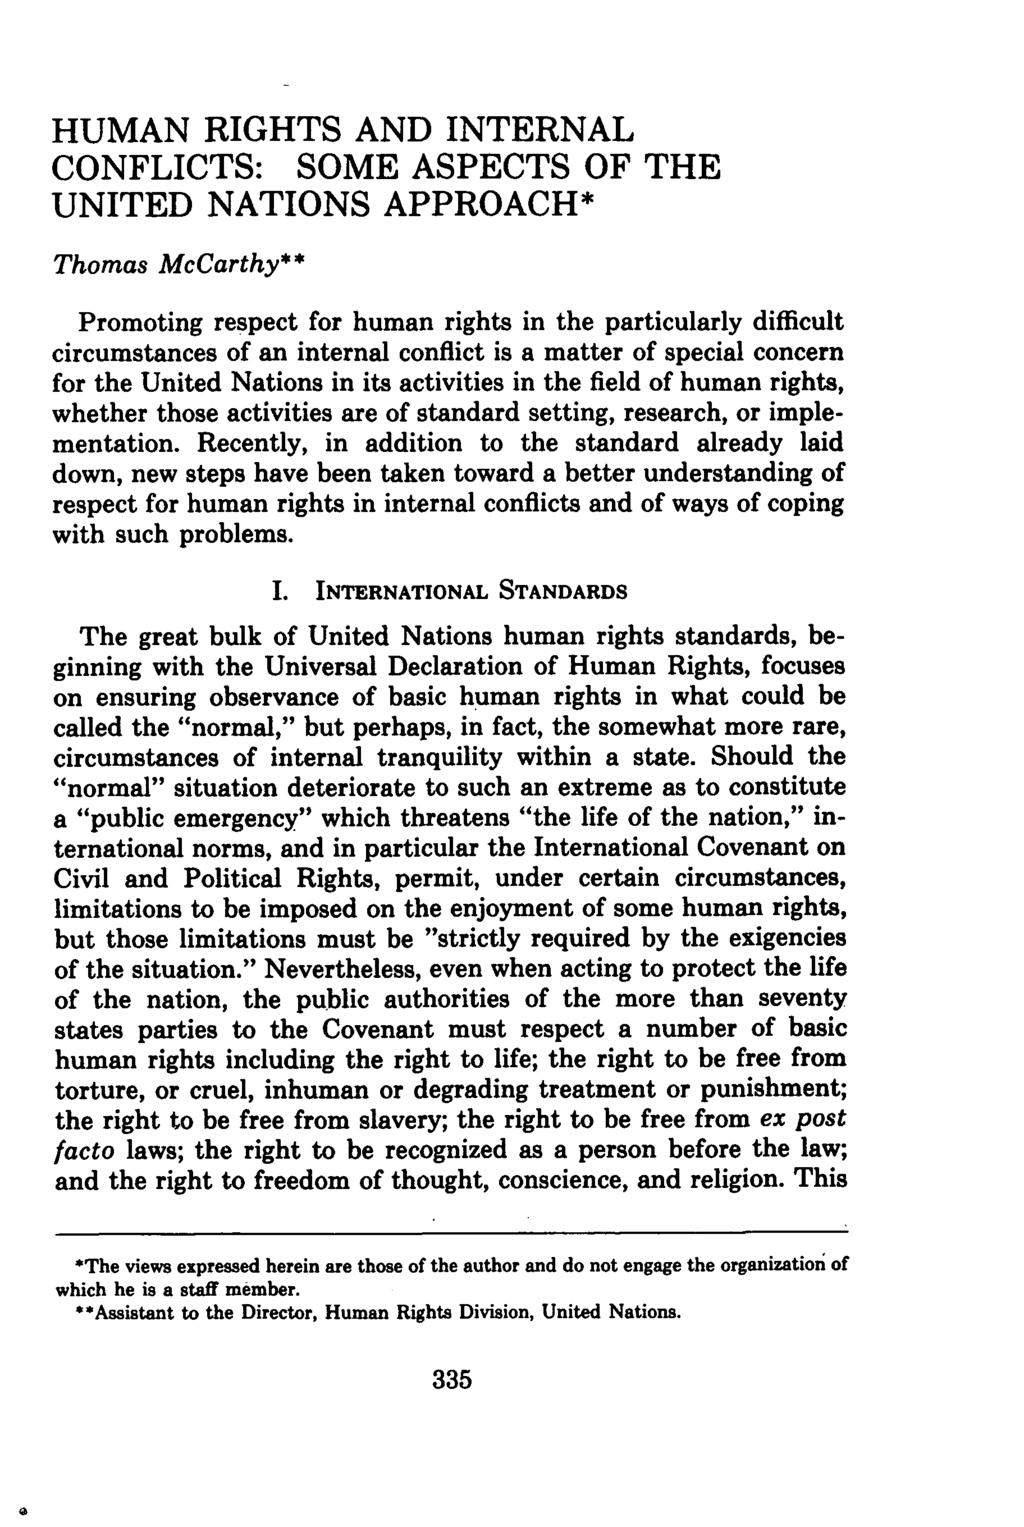 HUMAN RIGHTS AND INTERNAL CONFLICTS: SOME ASPECTS OF THE UNITED NATIONS APPROACH* Thomas McCarthy** Promoting respect for human rights in the particularly difficult circumstances of an internal